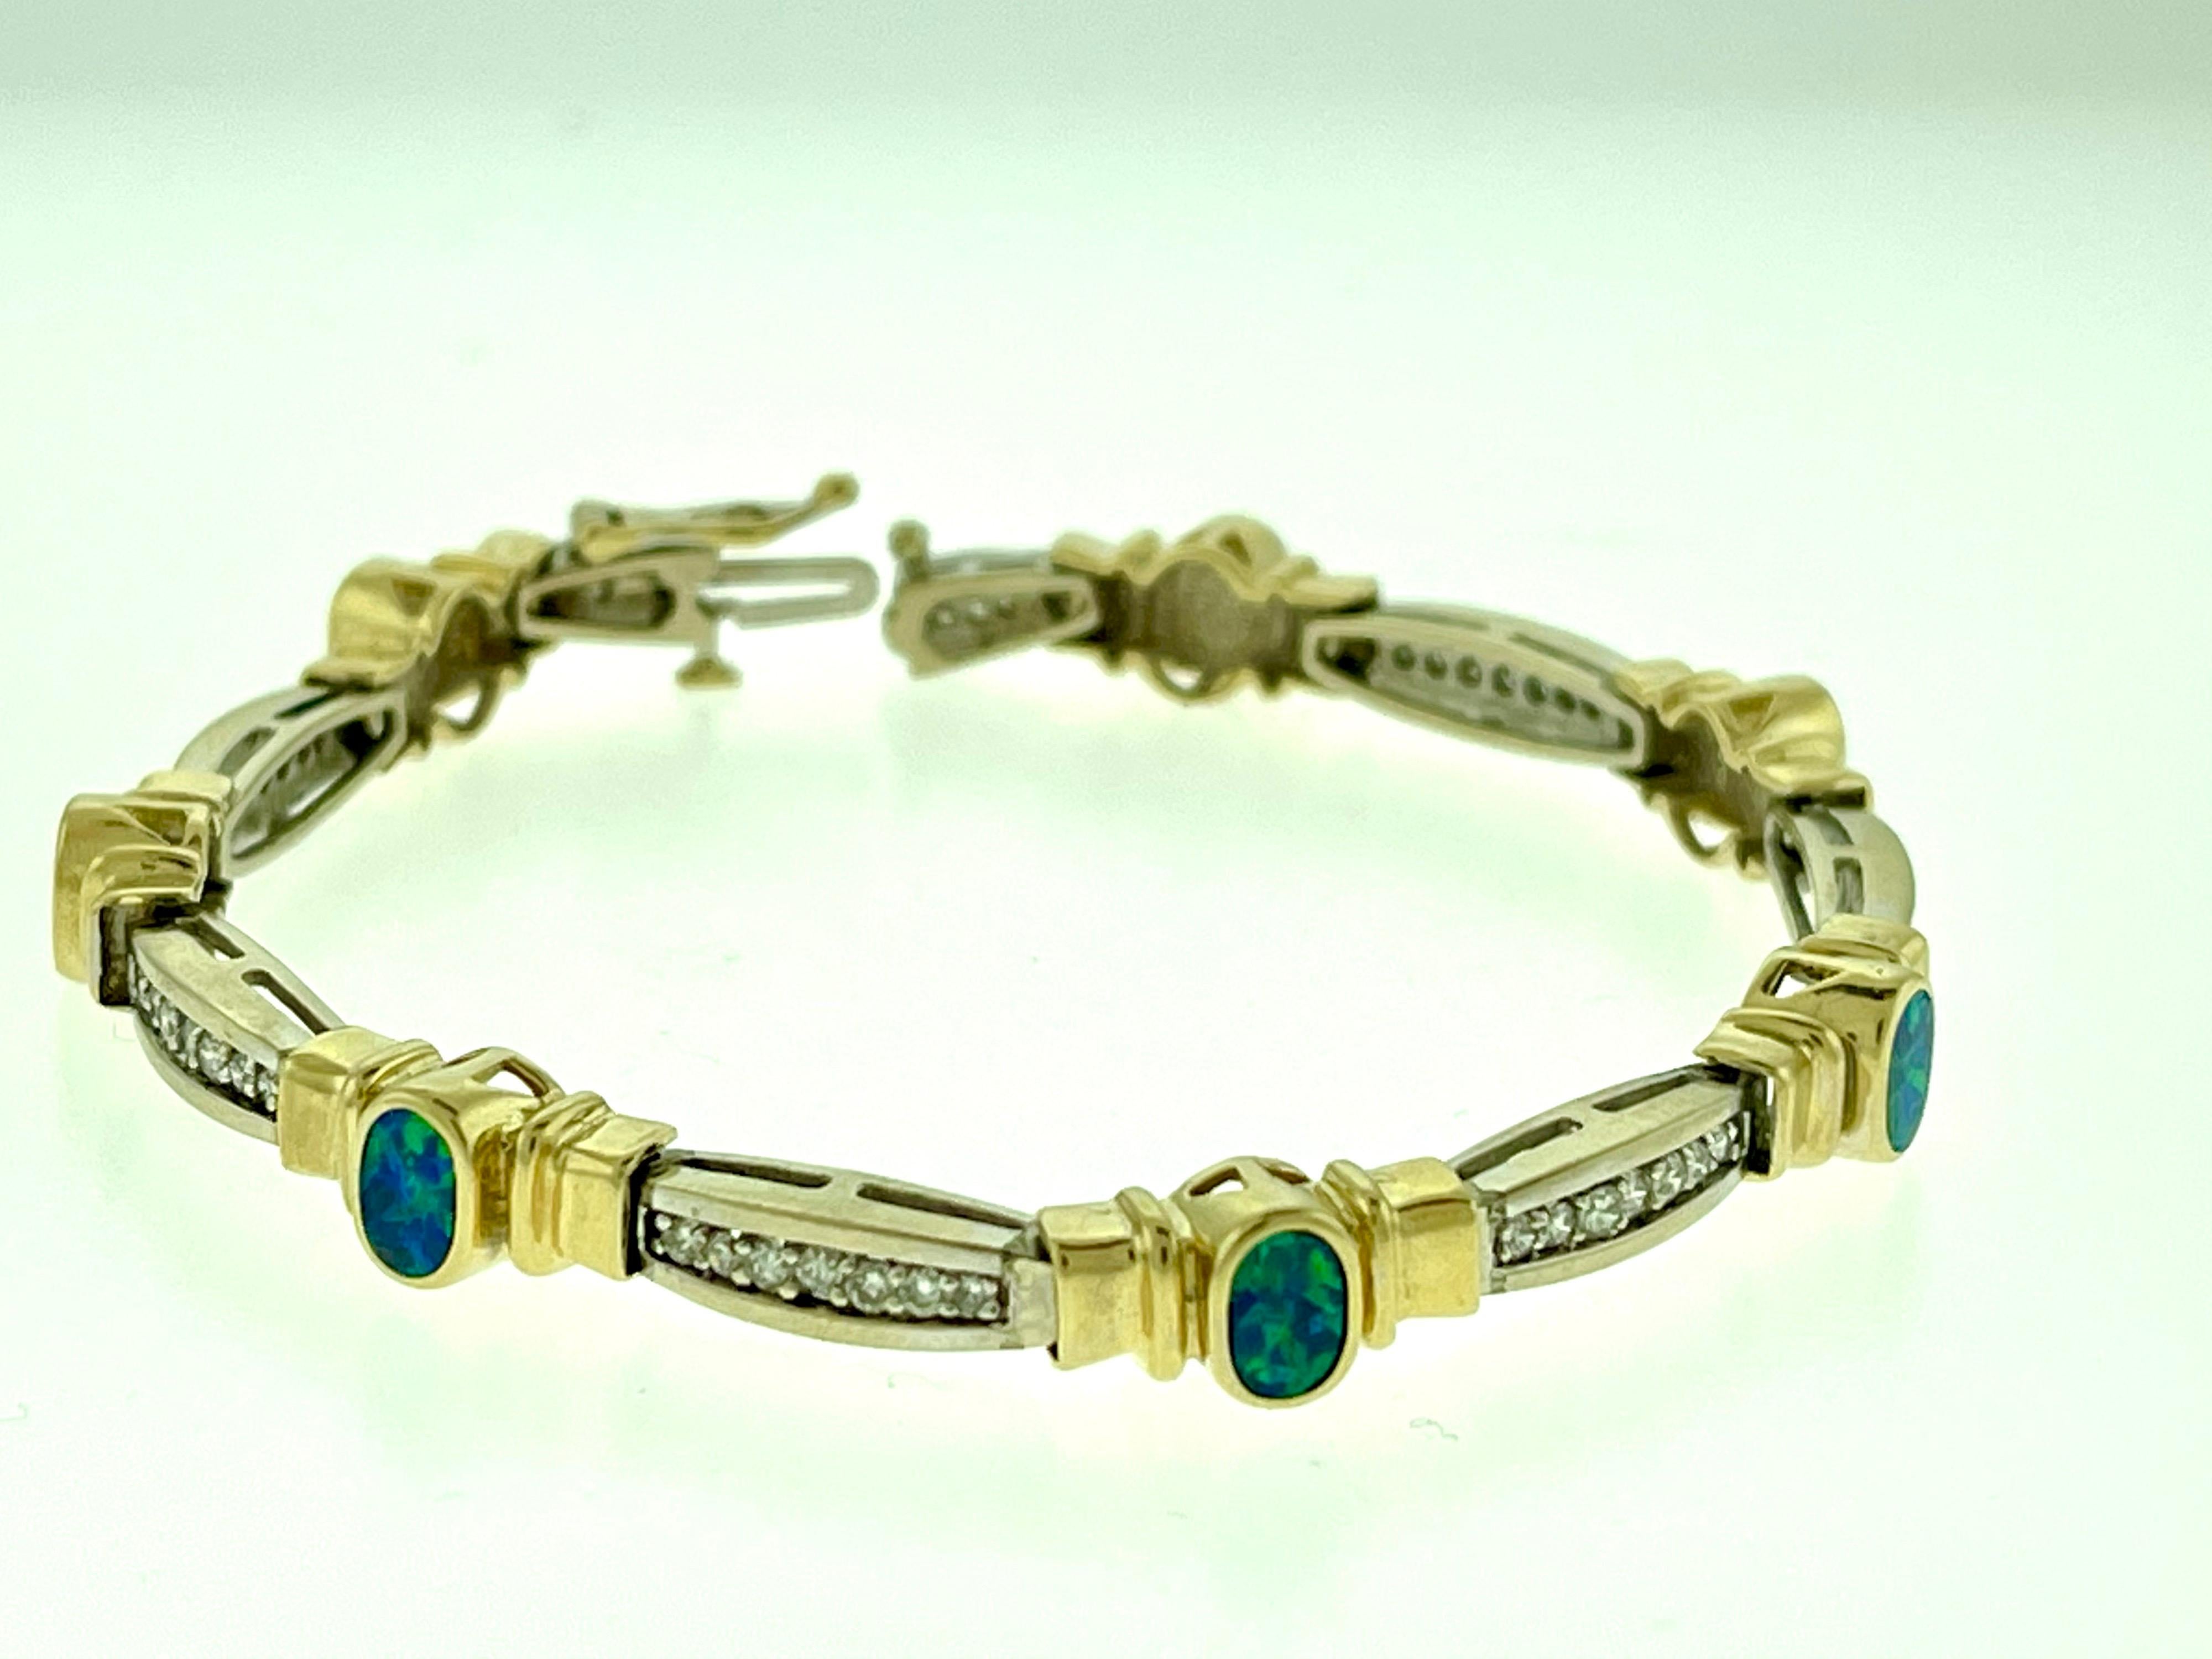  This exceptionally affordable Tennis  bracelet has  Multiple stones of  Opal in Oval shape . 
It has yellow and White gold both .
Diamond part is white gold and opal part is yellow gold . Please look at the pictures,
There are 7 oval  Opal stones 
